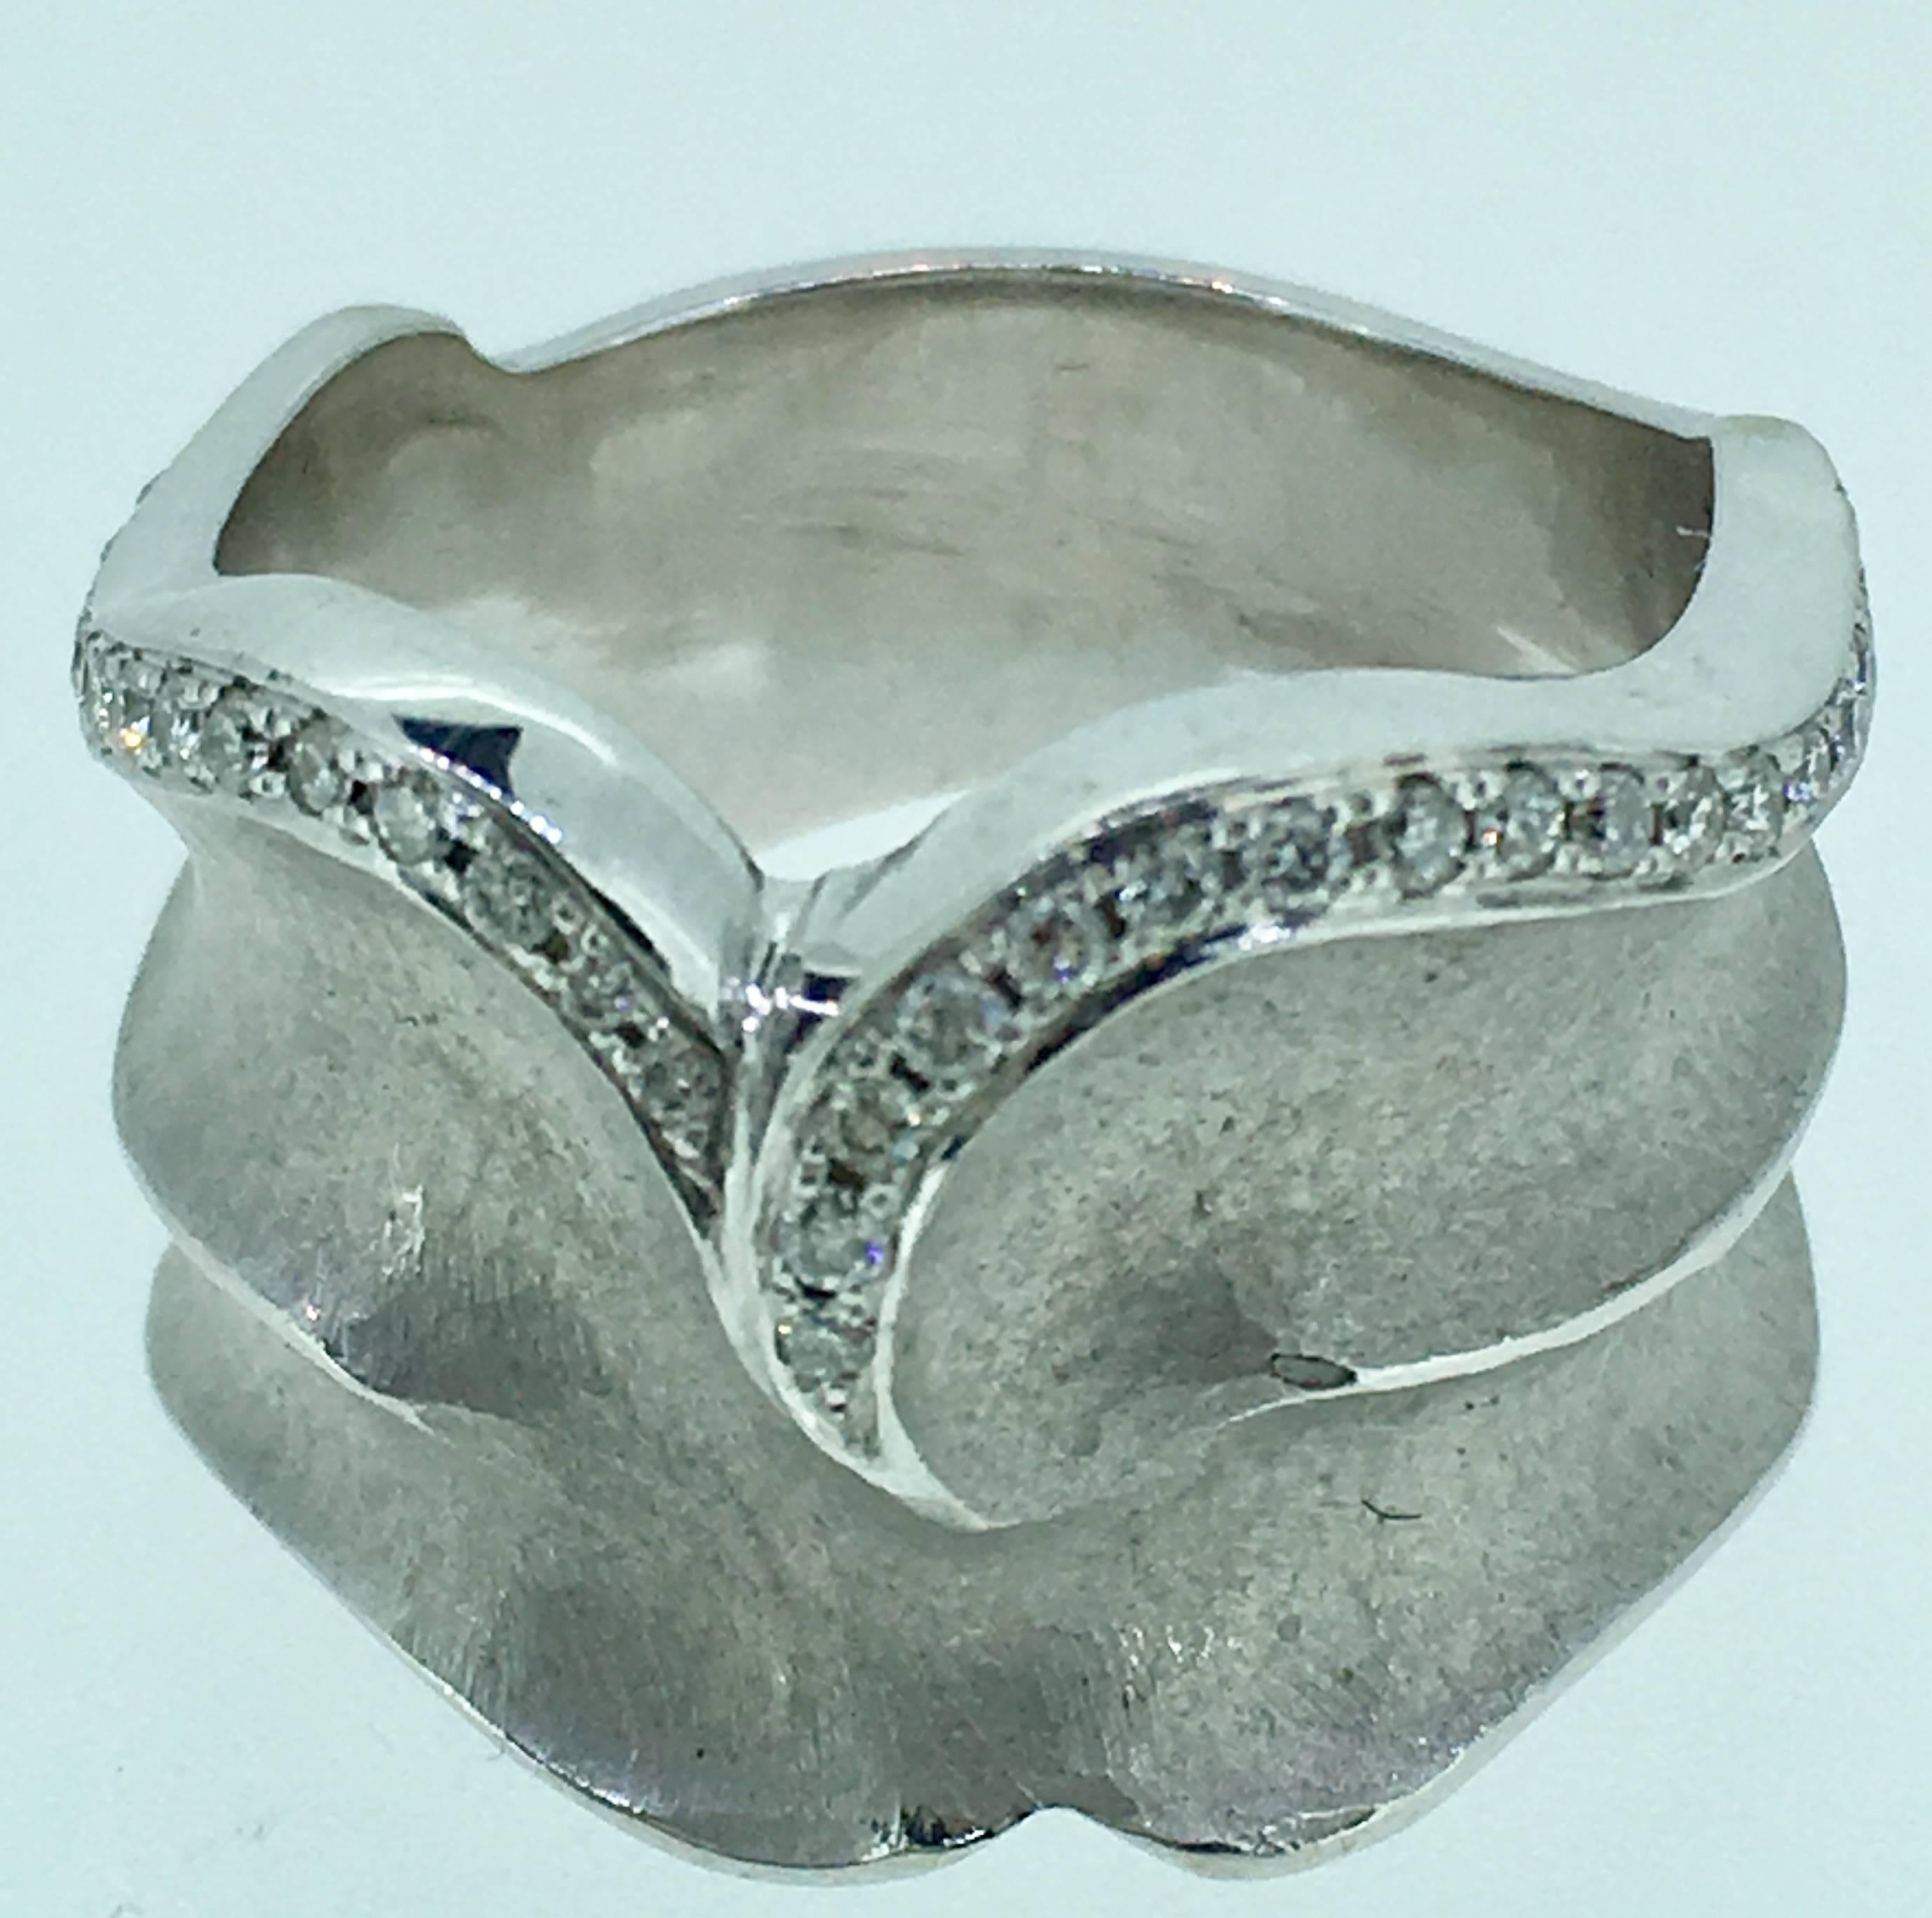 One of a kind SVG signed unique wedding ring. This piece is made of 10.4 gr white palladium gold and 0.3  cts diamonds